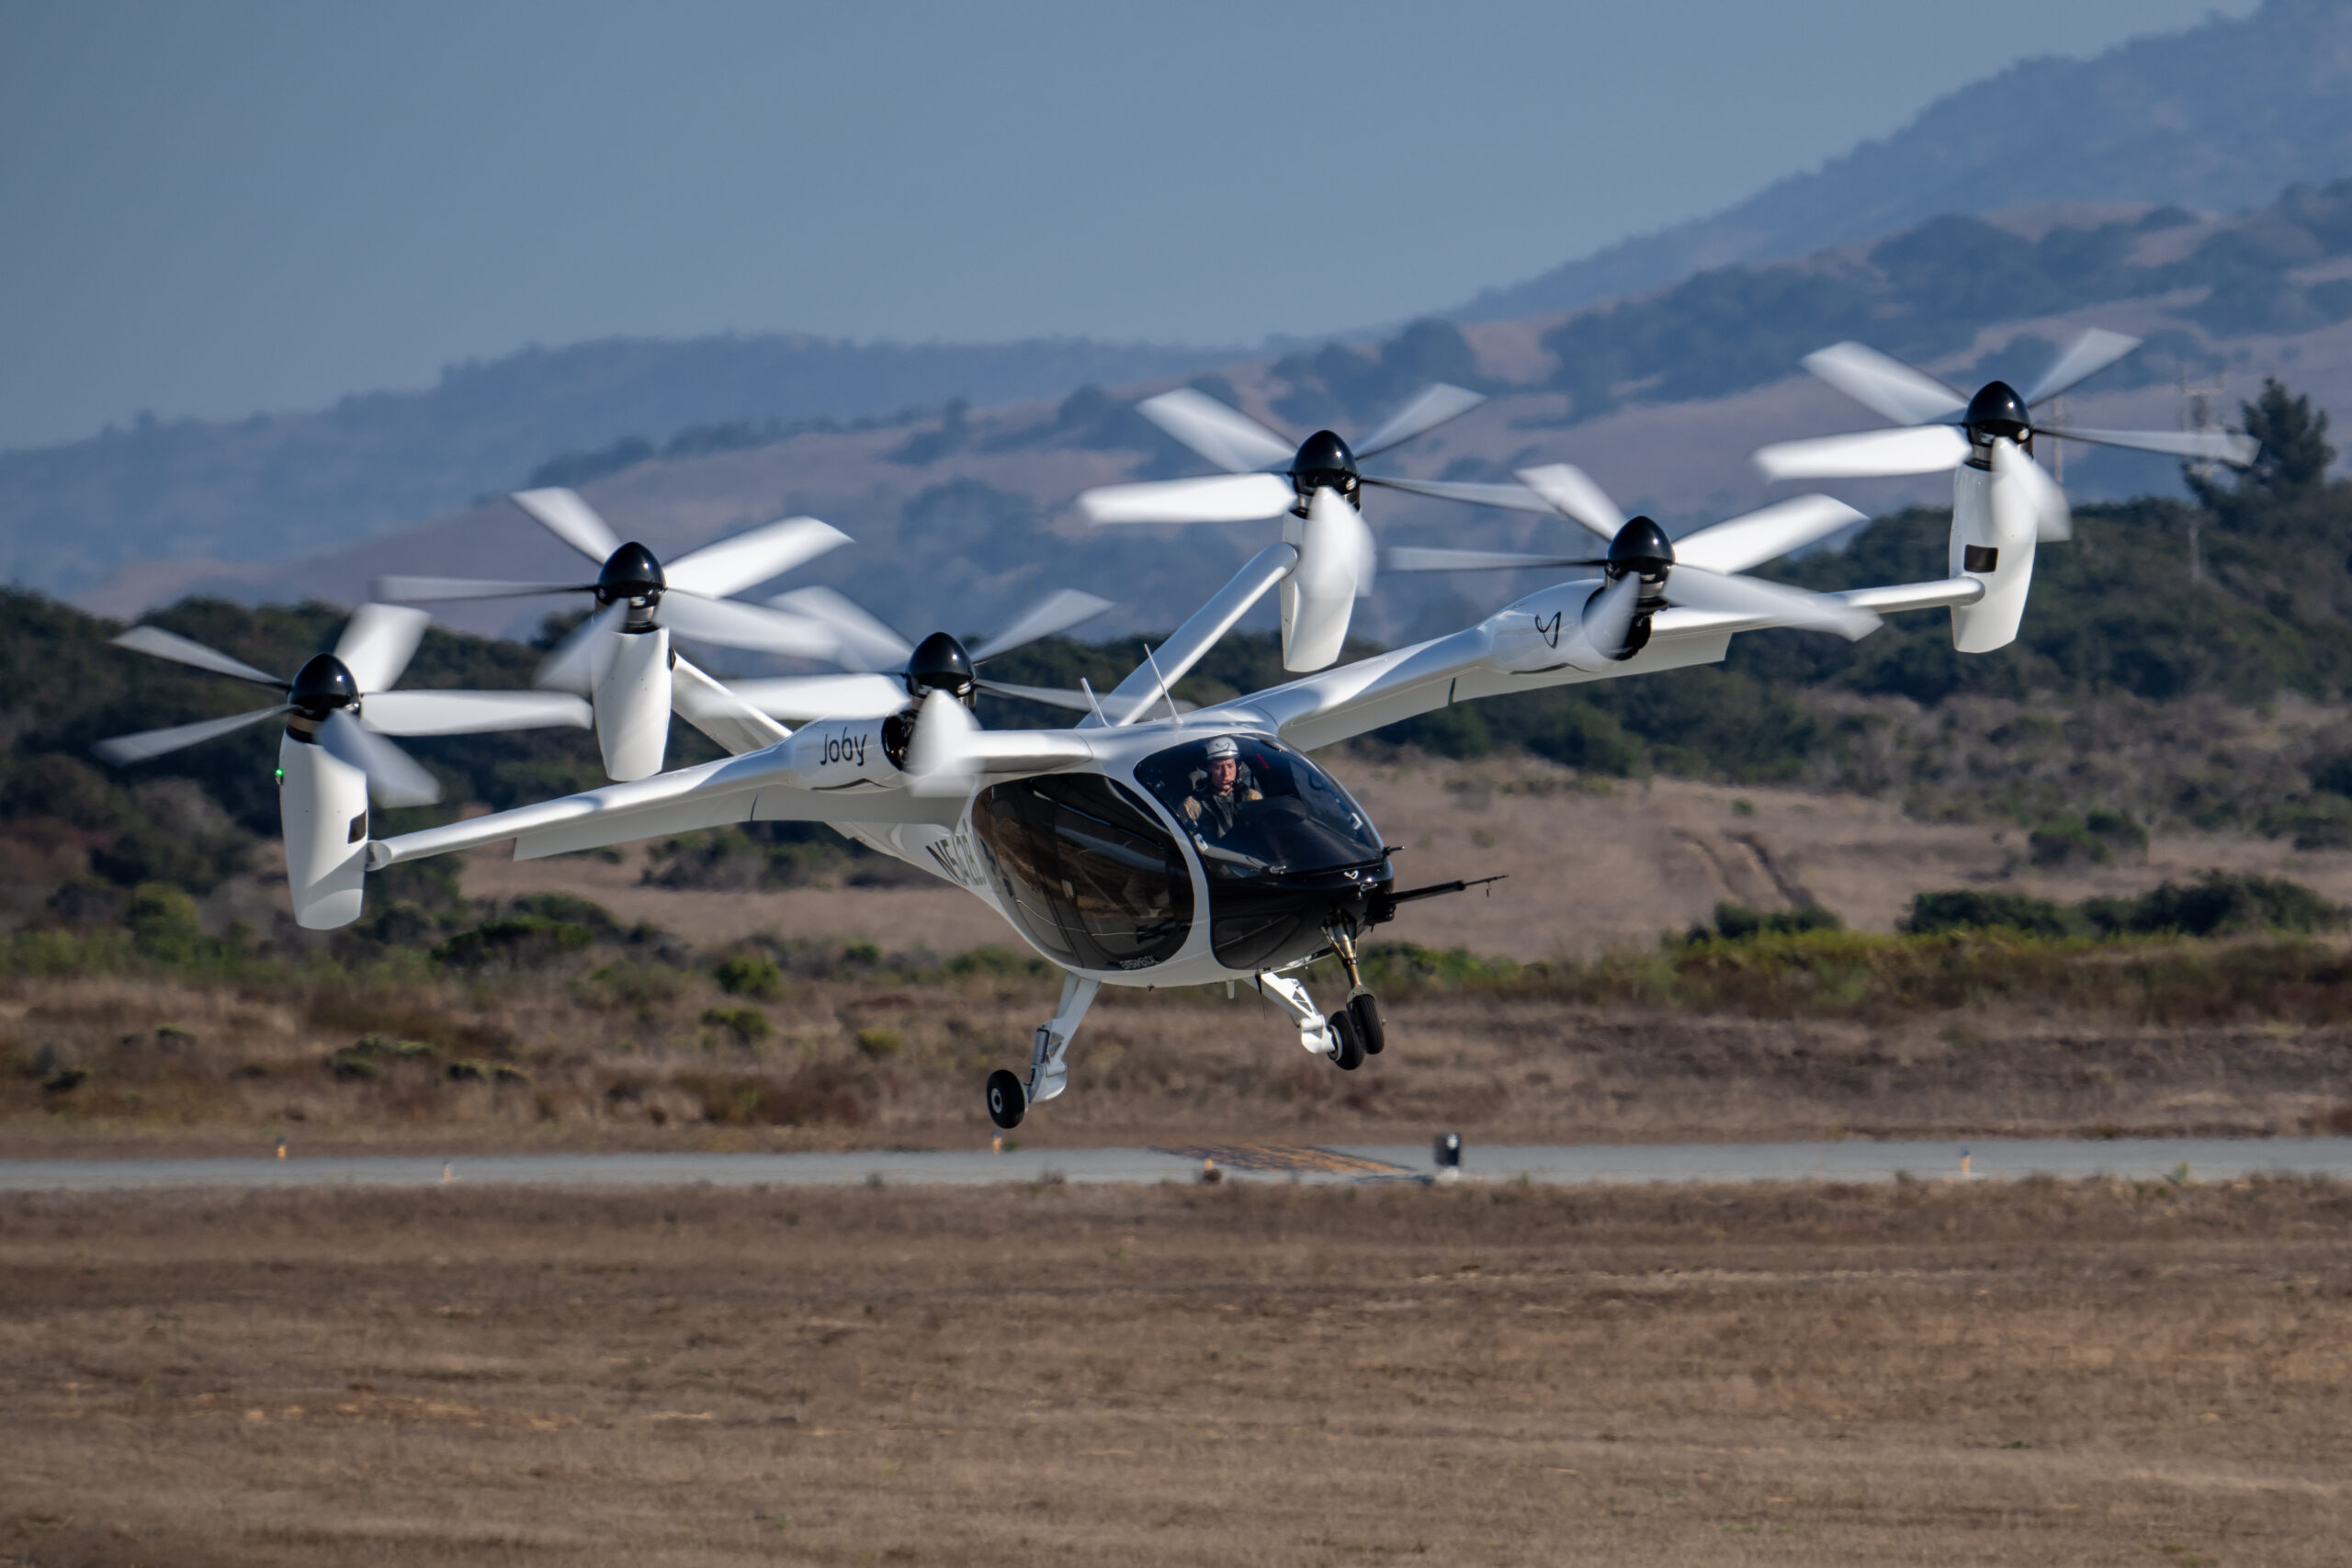 IFS Cloud has been selected by Joby Aviation to shape the future of eVTOL aircraft